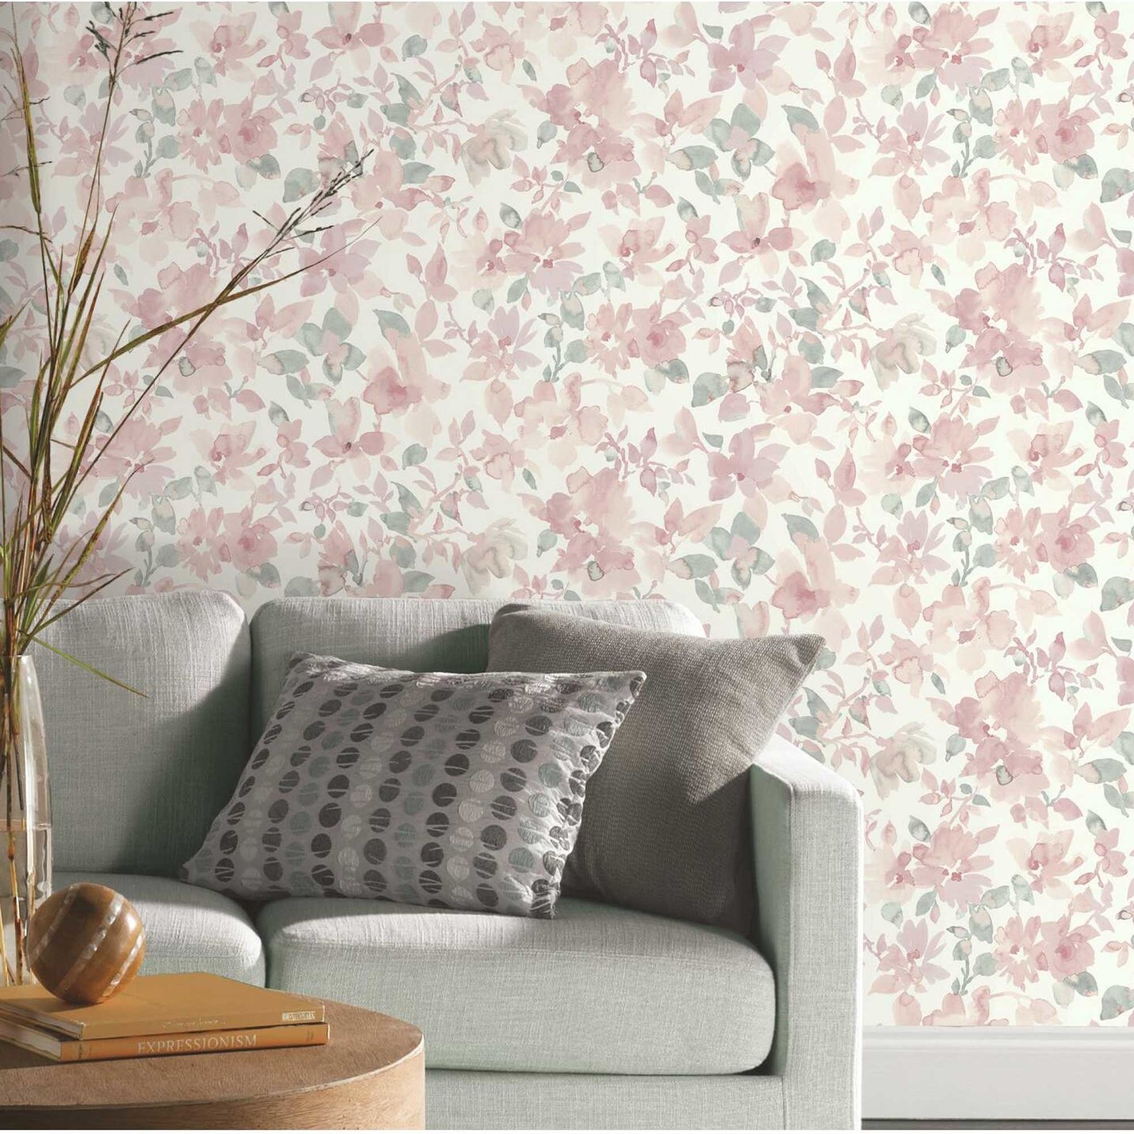 RoomMates Neutral Watercolor Floral Peel and Stick Wallpaper - Image 6 of 9